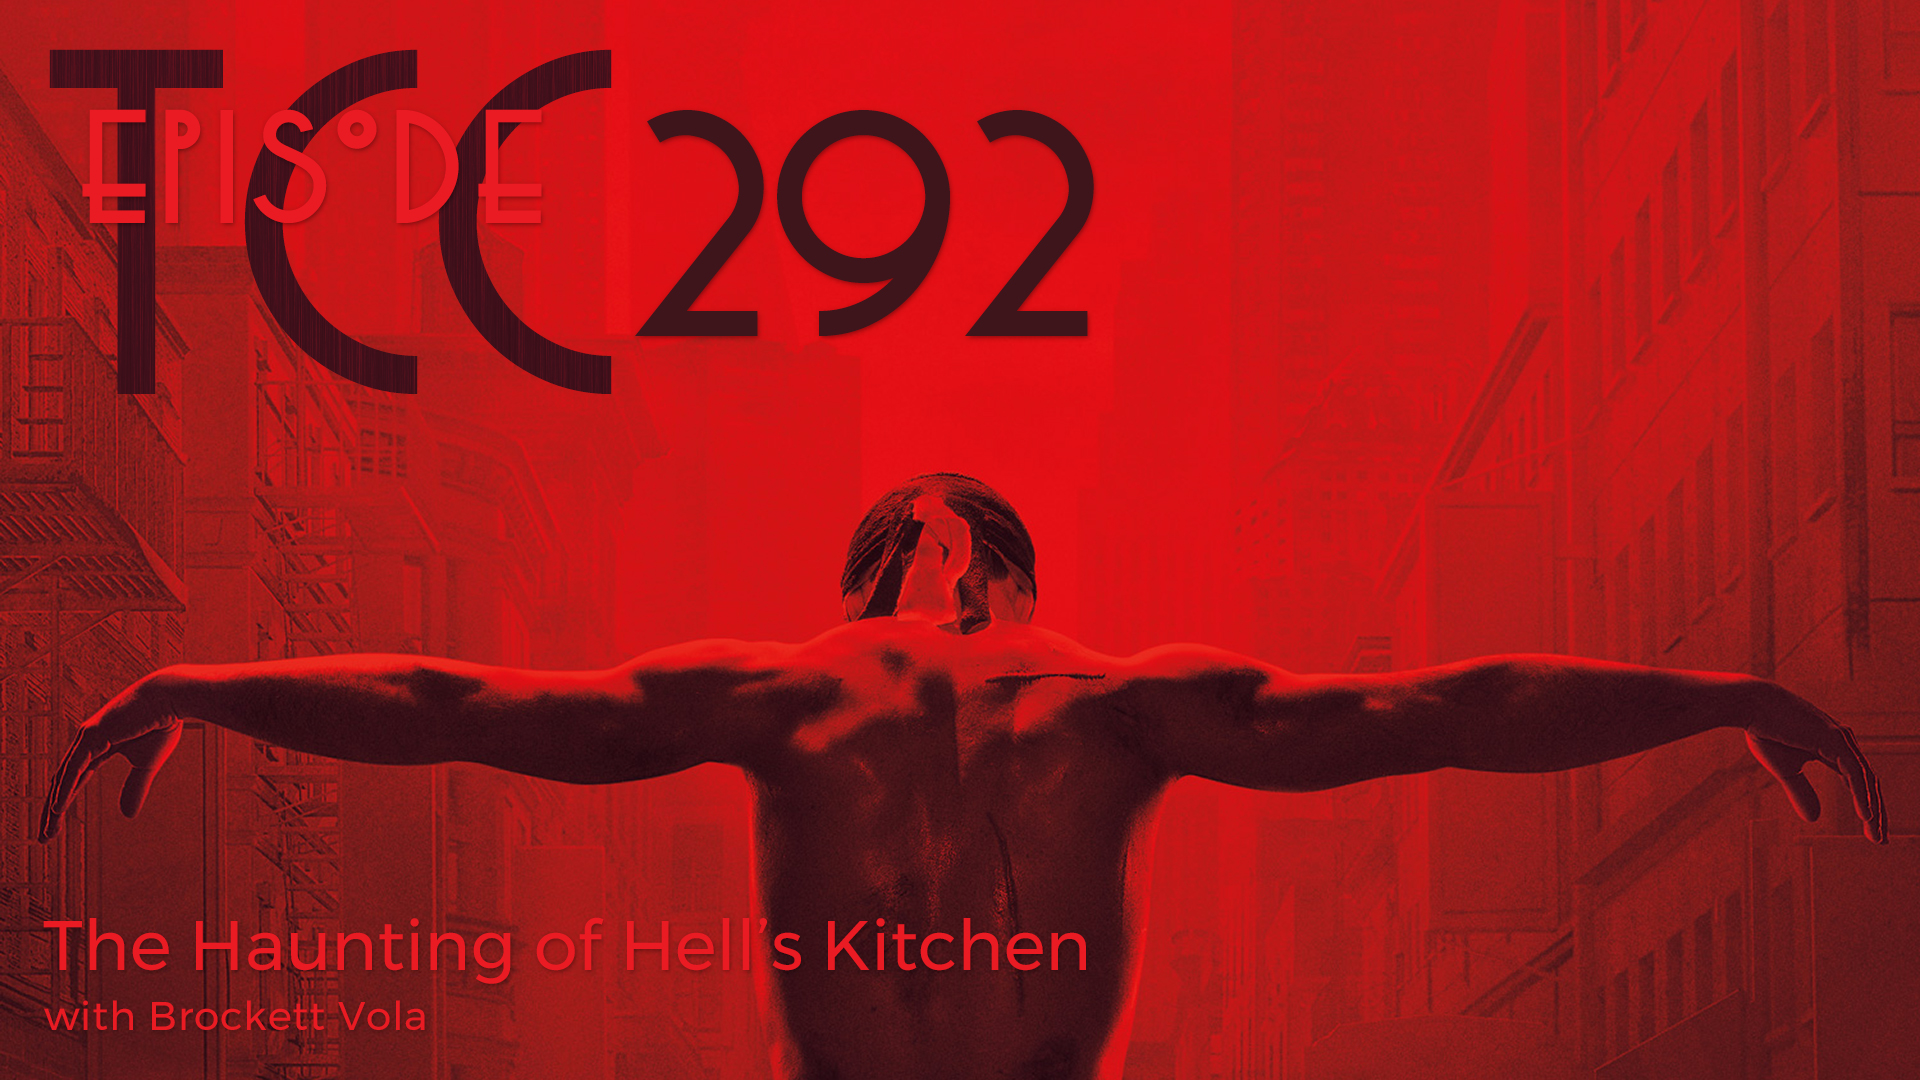 The Citadel Cafe 292: The Haunting of Hell’s Kitchen